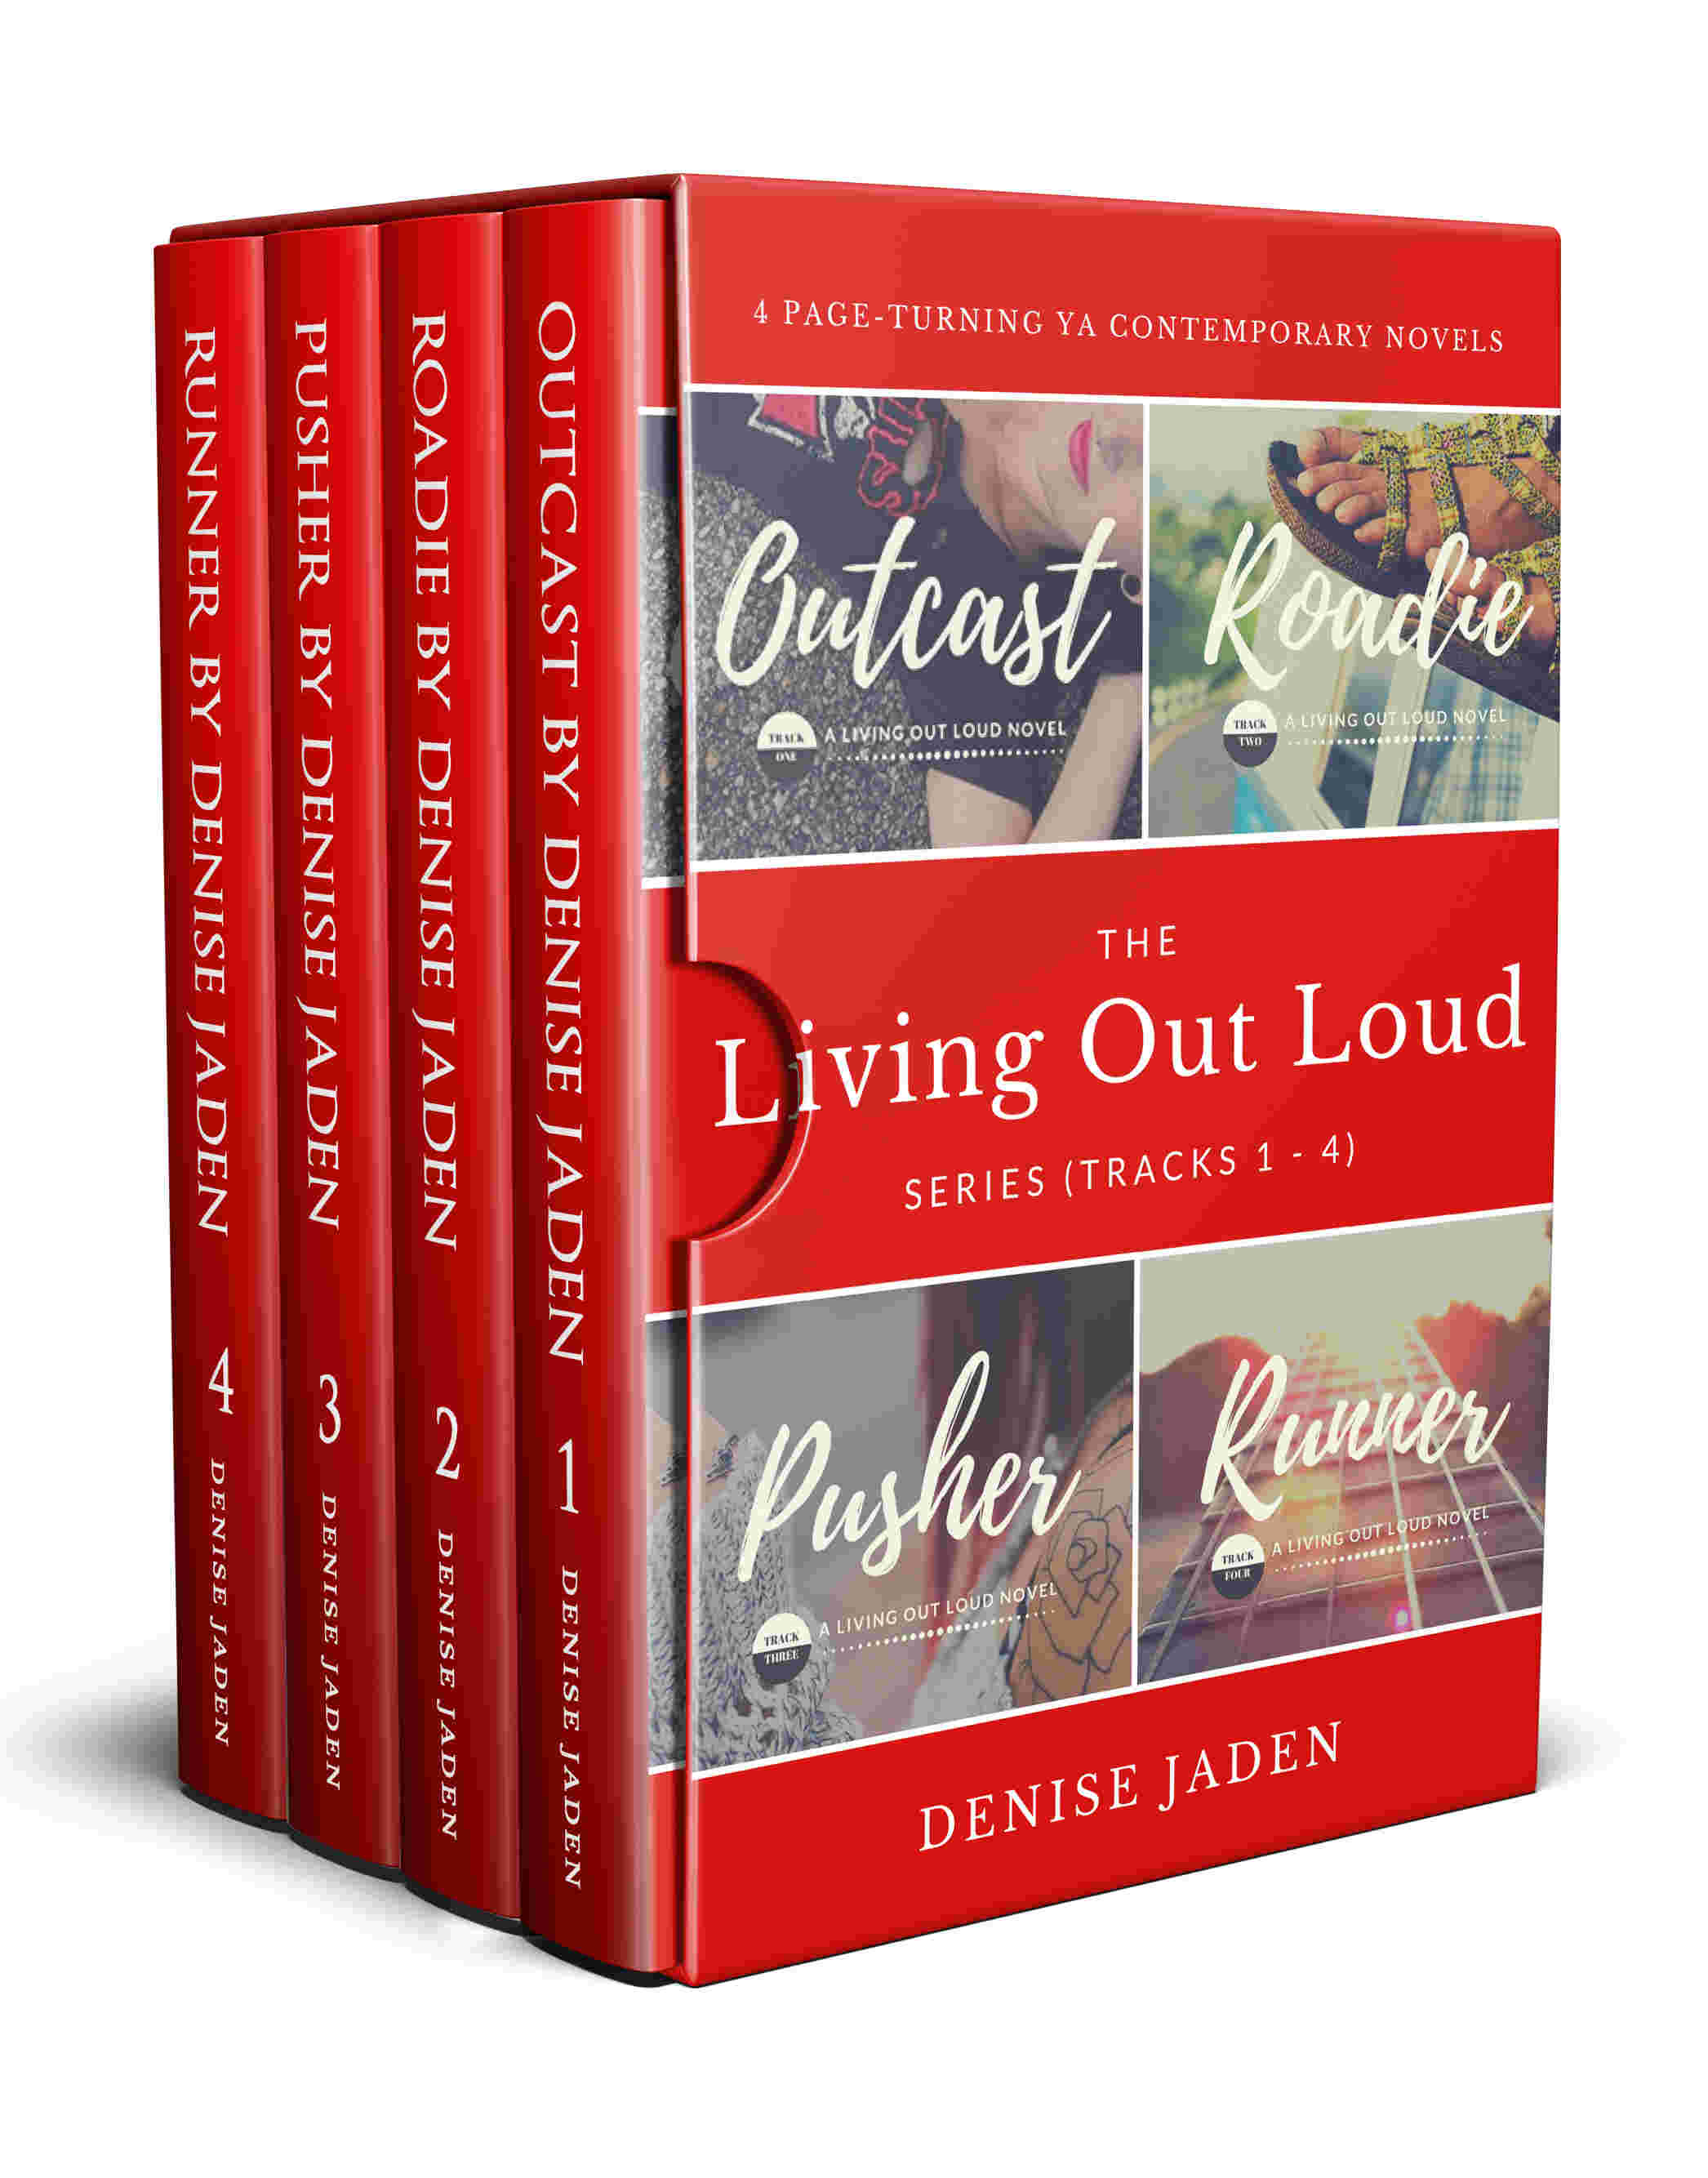 FREE: Living Out Loud Series Box Set by Denise Jaden